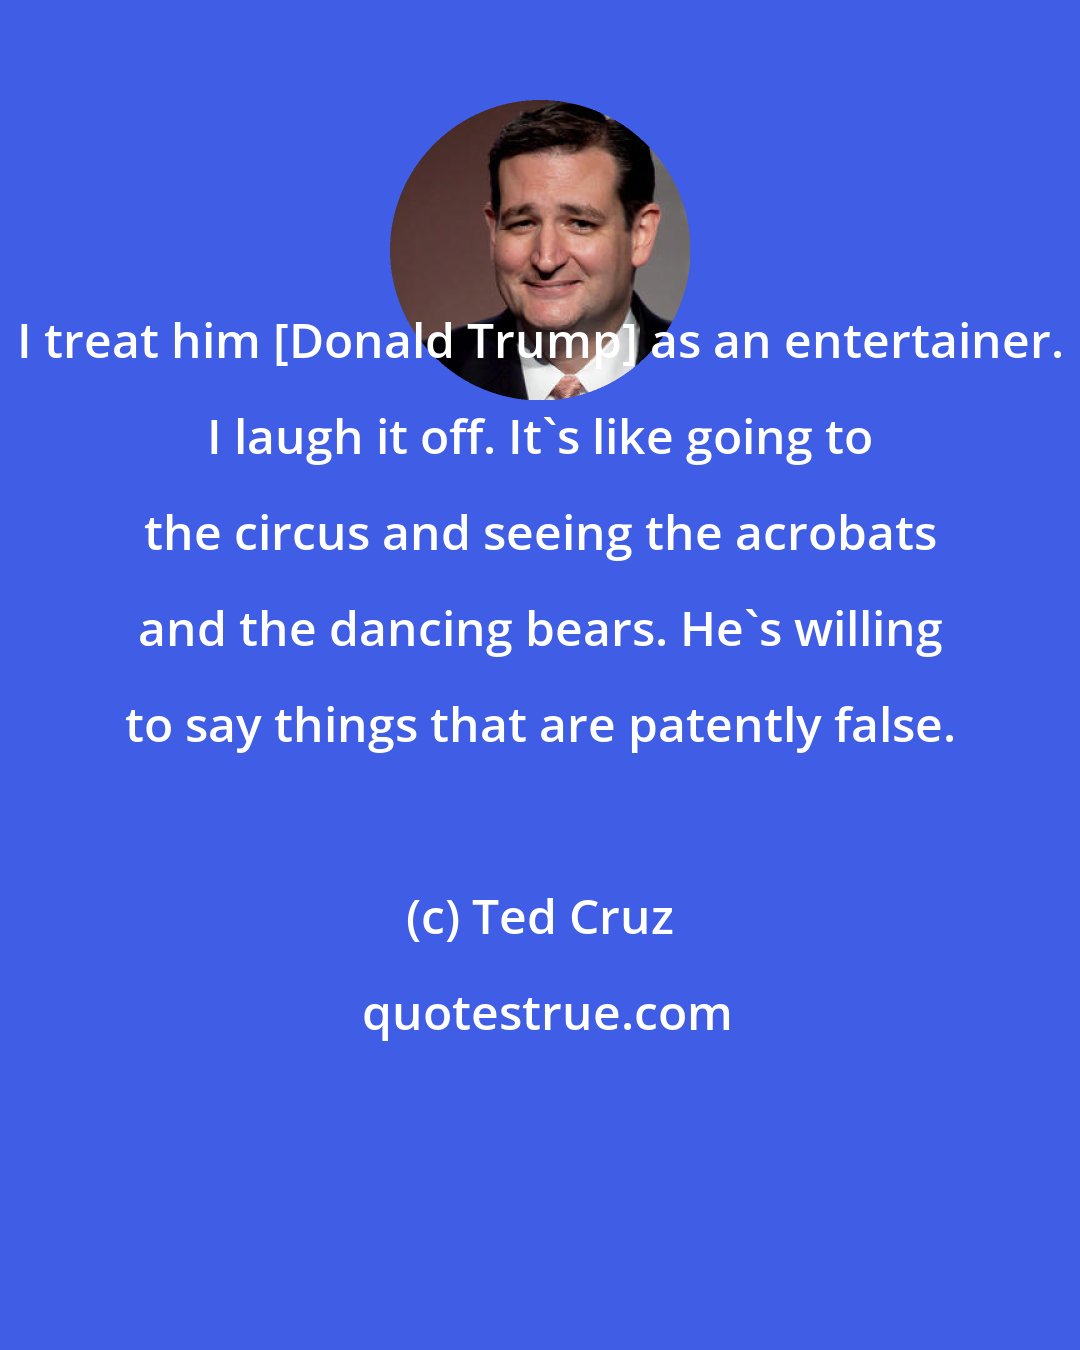 Ted Cruz: I treat him [Donald Trump] as an entertainer. I laugh it off. It's like going to the circus and seeing the acrobats and the dancing bears. He's willing to say things that are patently false.